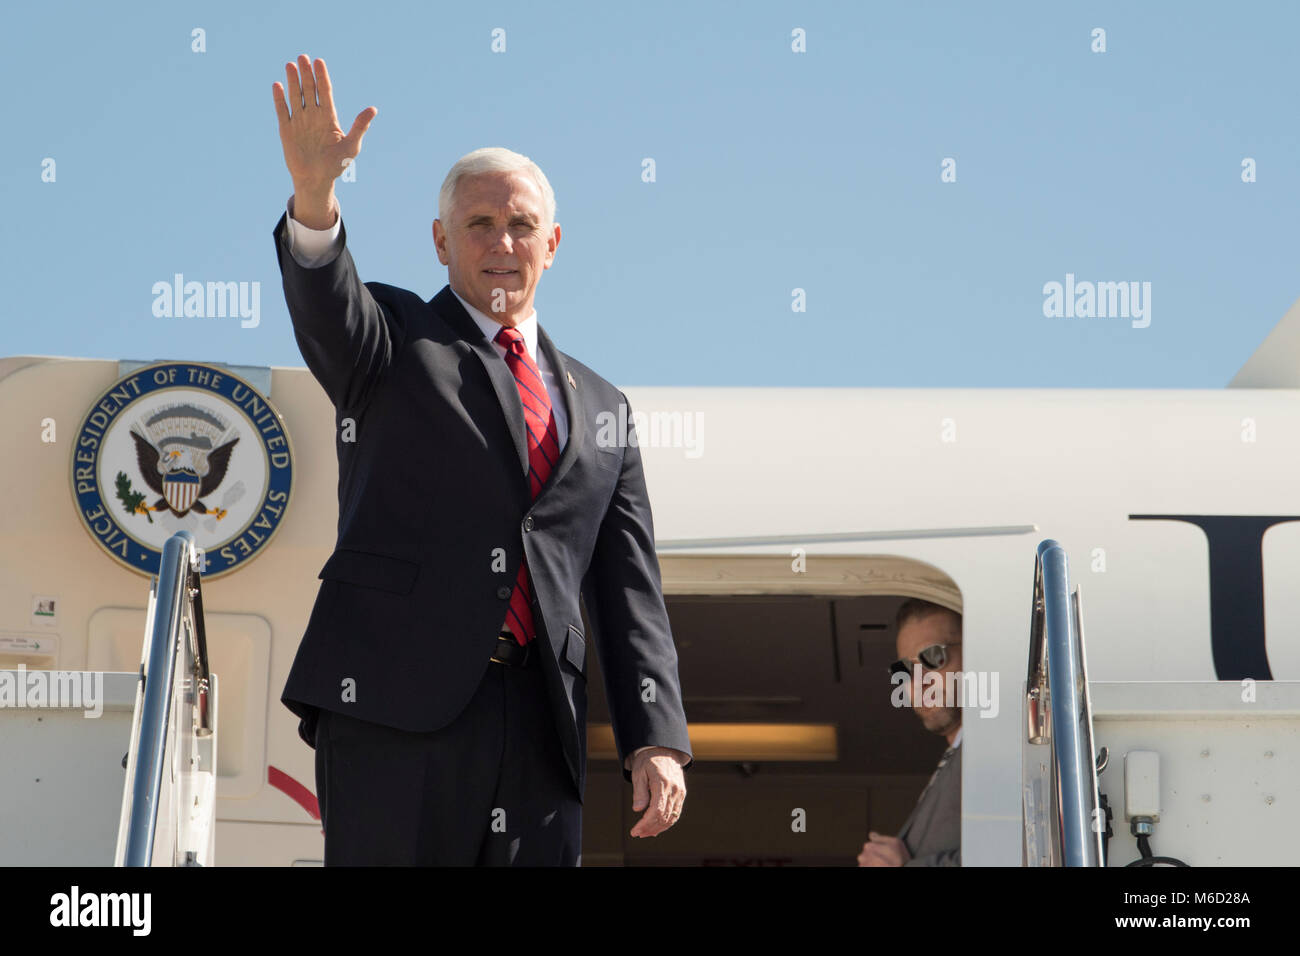 Vice President Mike Pence waves before boarding Air Force Two at Joint Base Andrews, Md., Feb. 27, 2018 before he departs to Nashville, Tenn. The 89th Airlift Wing provides global Special Air Mission airlift, logistics, aerial port and communications for the president, vice president, cabinet members, combatant commanders and other senior military and elected leaders as tasked by the White House, Air Force chief of staff and Air Mobility Command. (U.S. Air Force photo/Tech. Sgt. Robert Cloys) Stock Photo